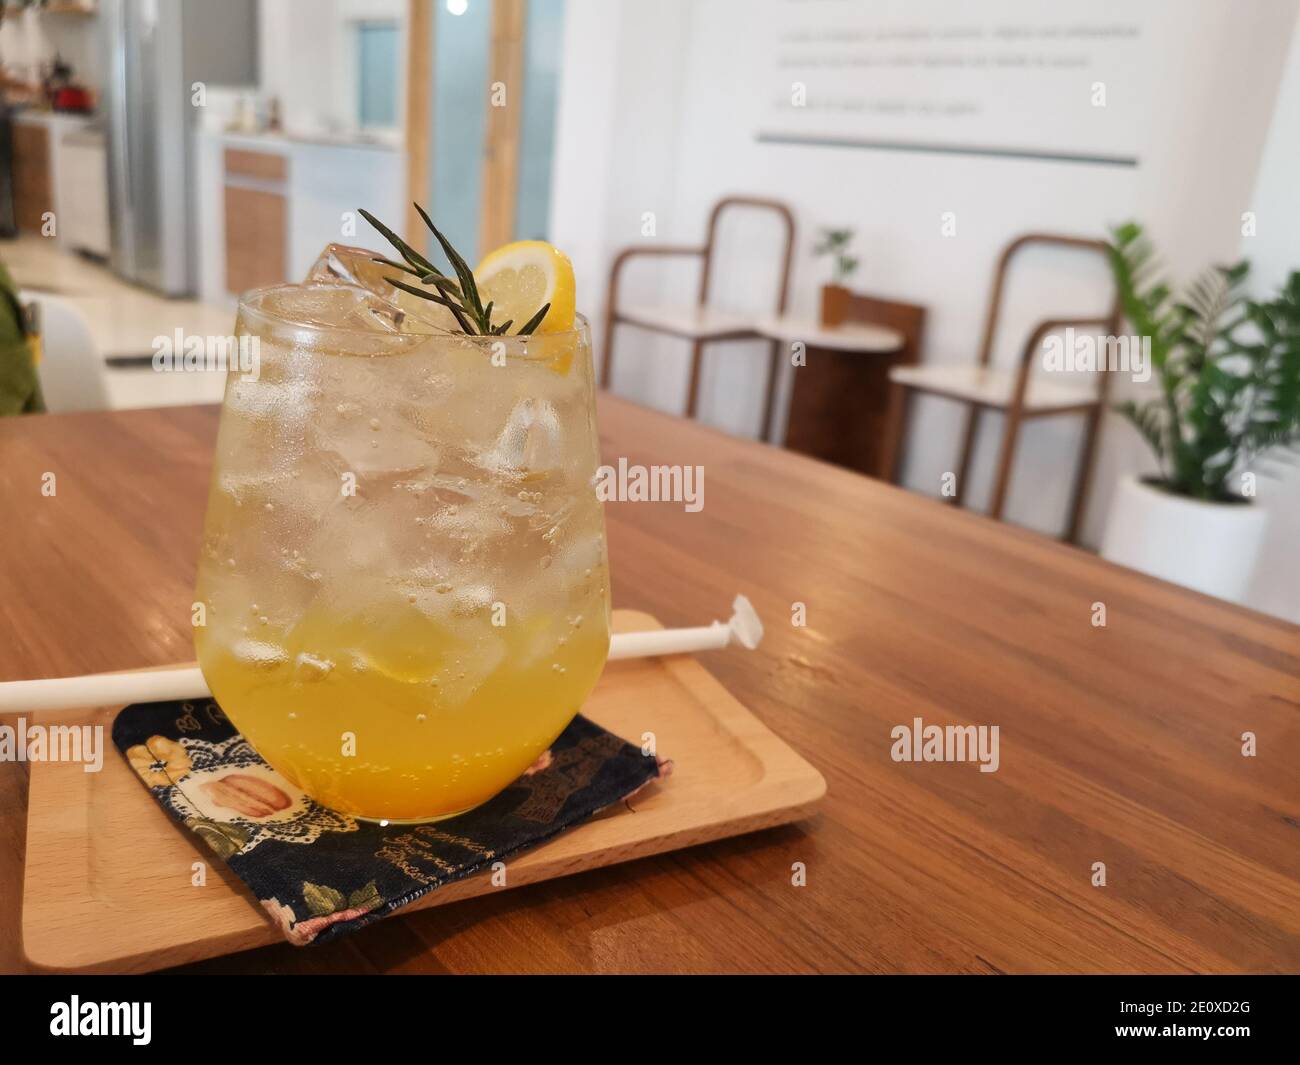 Yuzu orange drink with soda with ice. The drink splits the orange juice and soda into two different colors. The background is a blurry cafe. Stock Photo